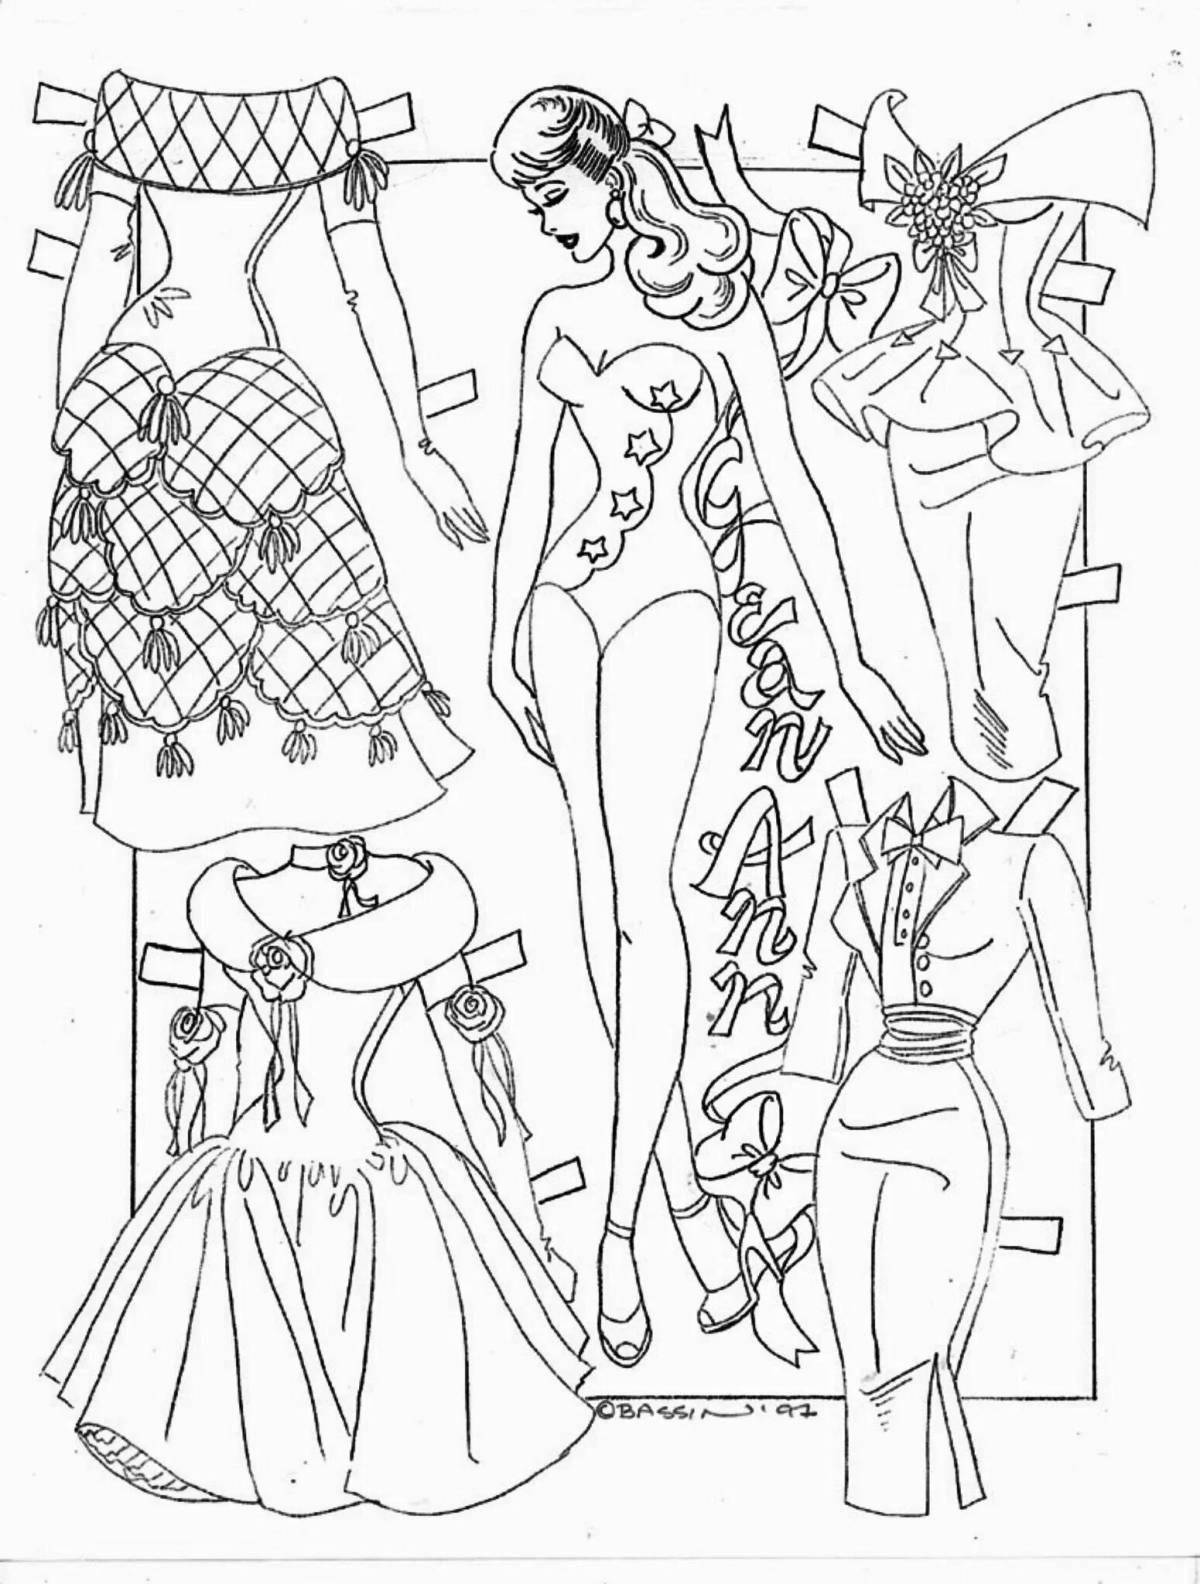 Fun coloring paper barbie doll with clothes to cut out